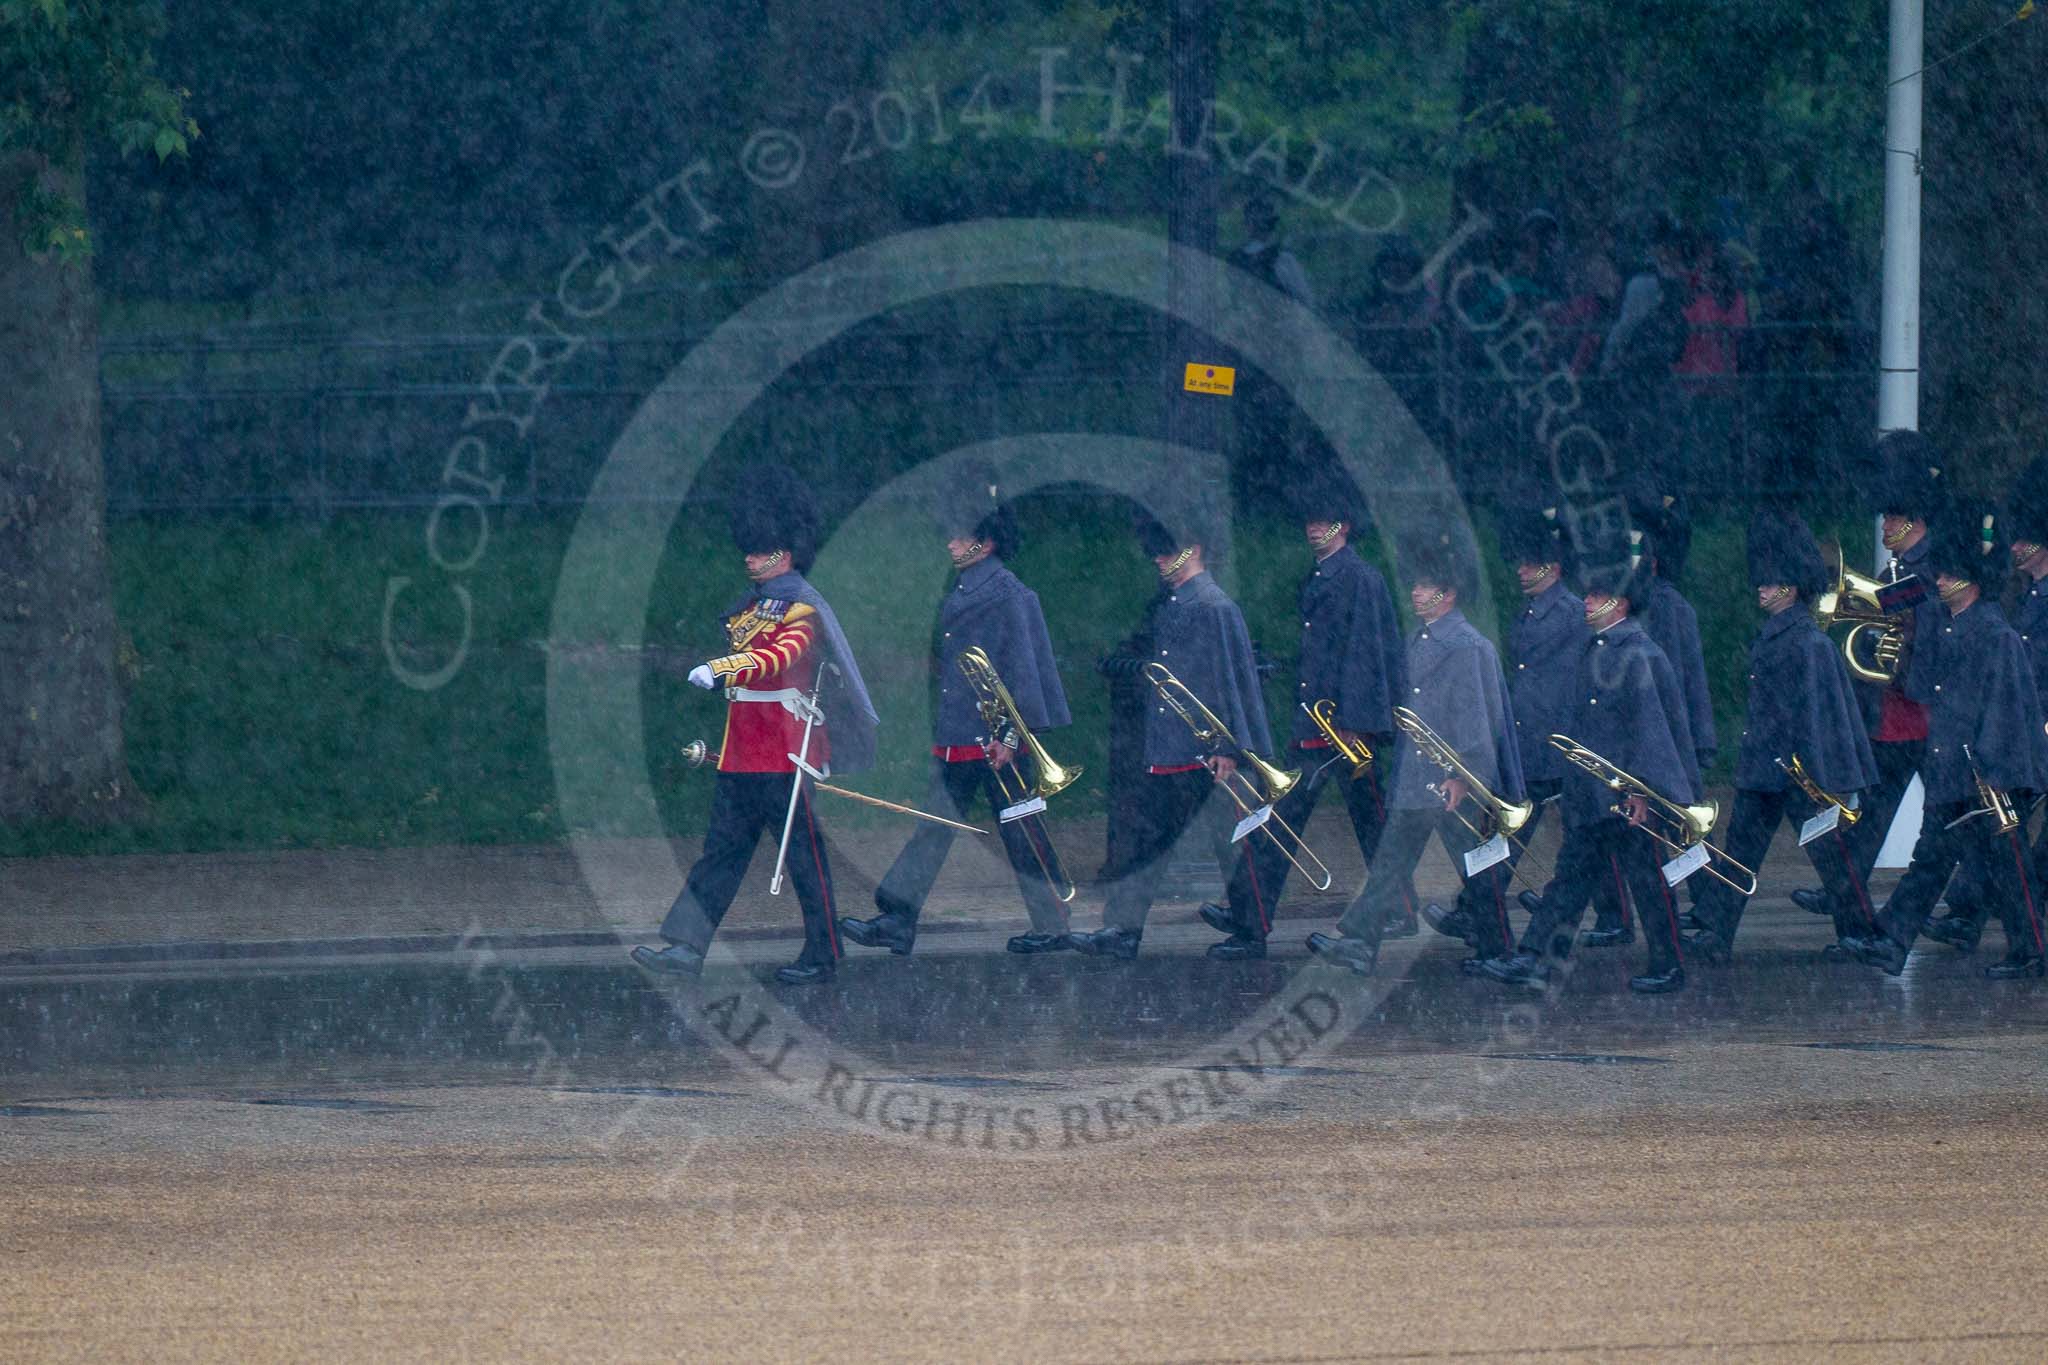 The Colonel's Review 2014.
Horse Guards Parade, Westminster,
London,

United Kingdom,
on 07 June 2014 at 10:01, image #32